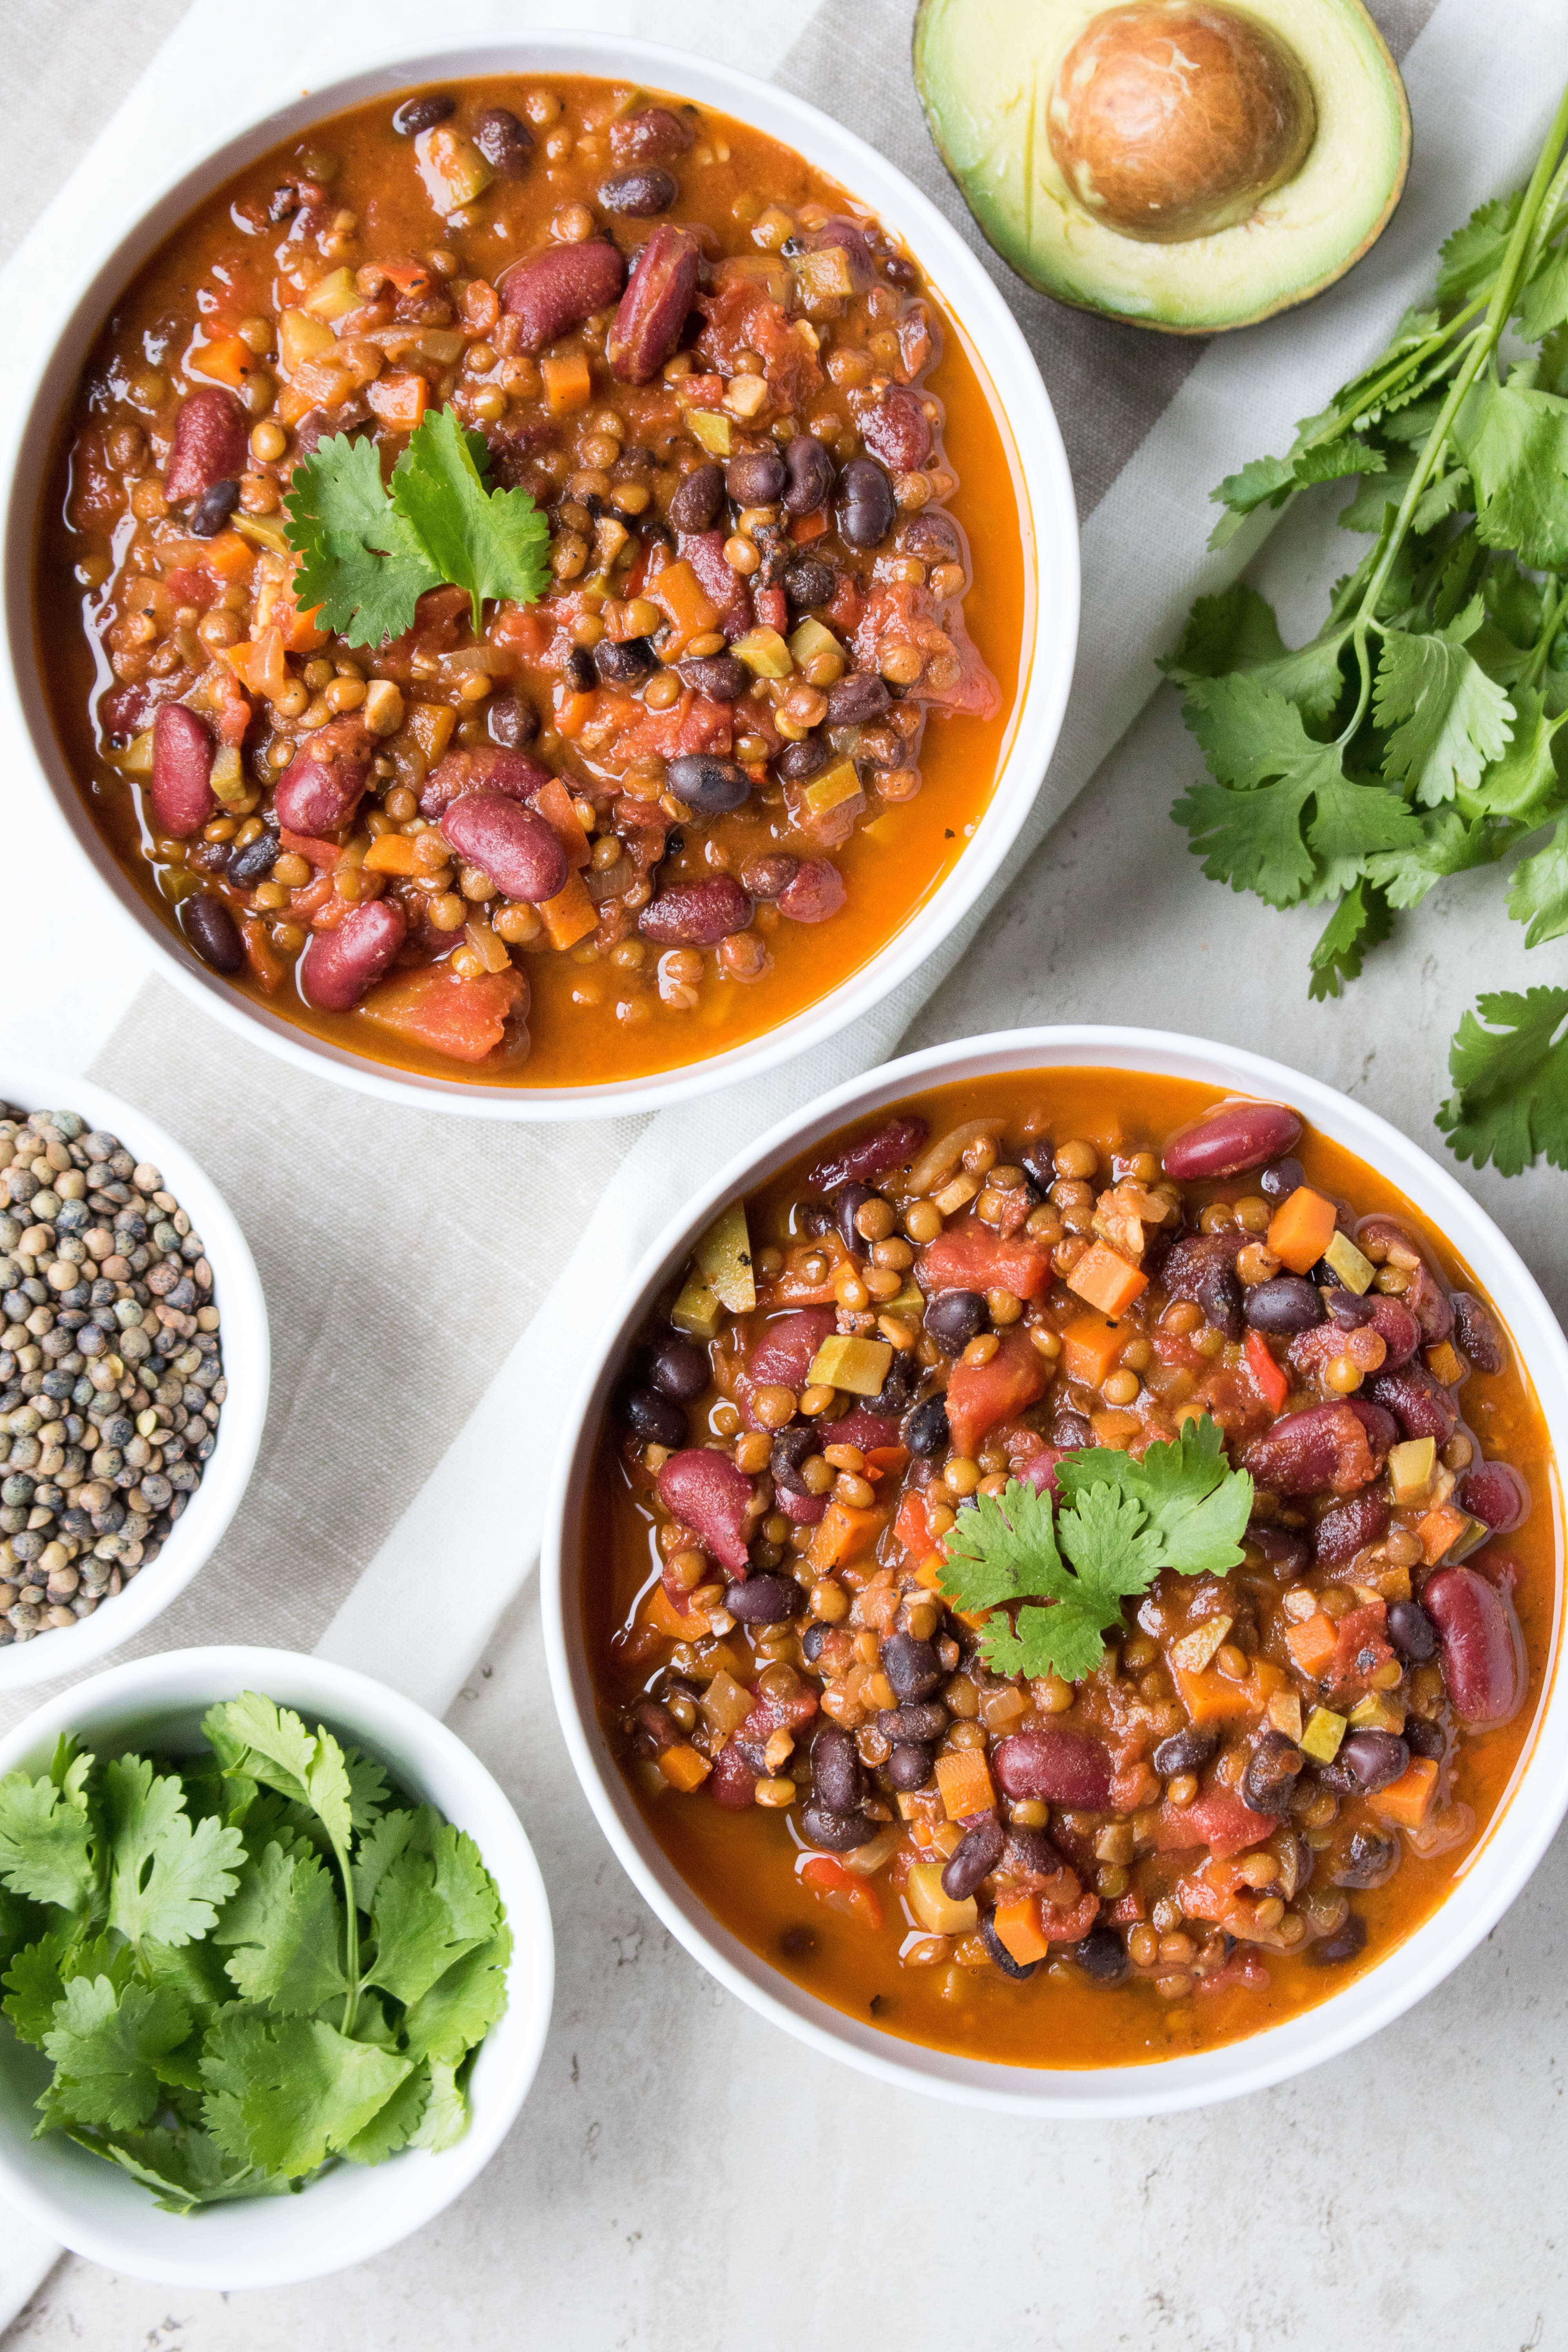 Vegetarian Chili with Lentils